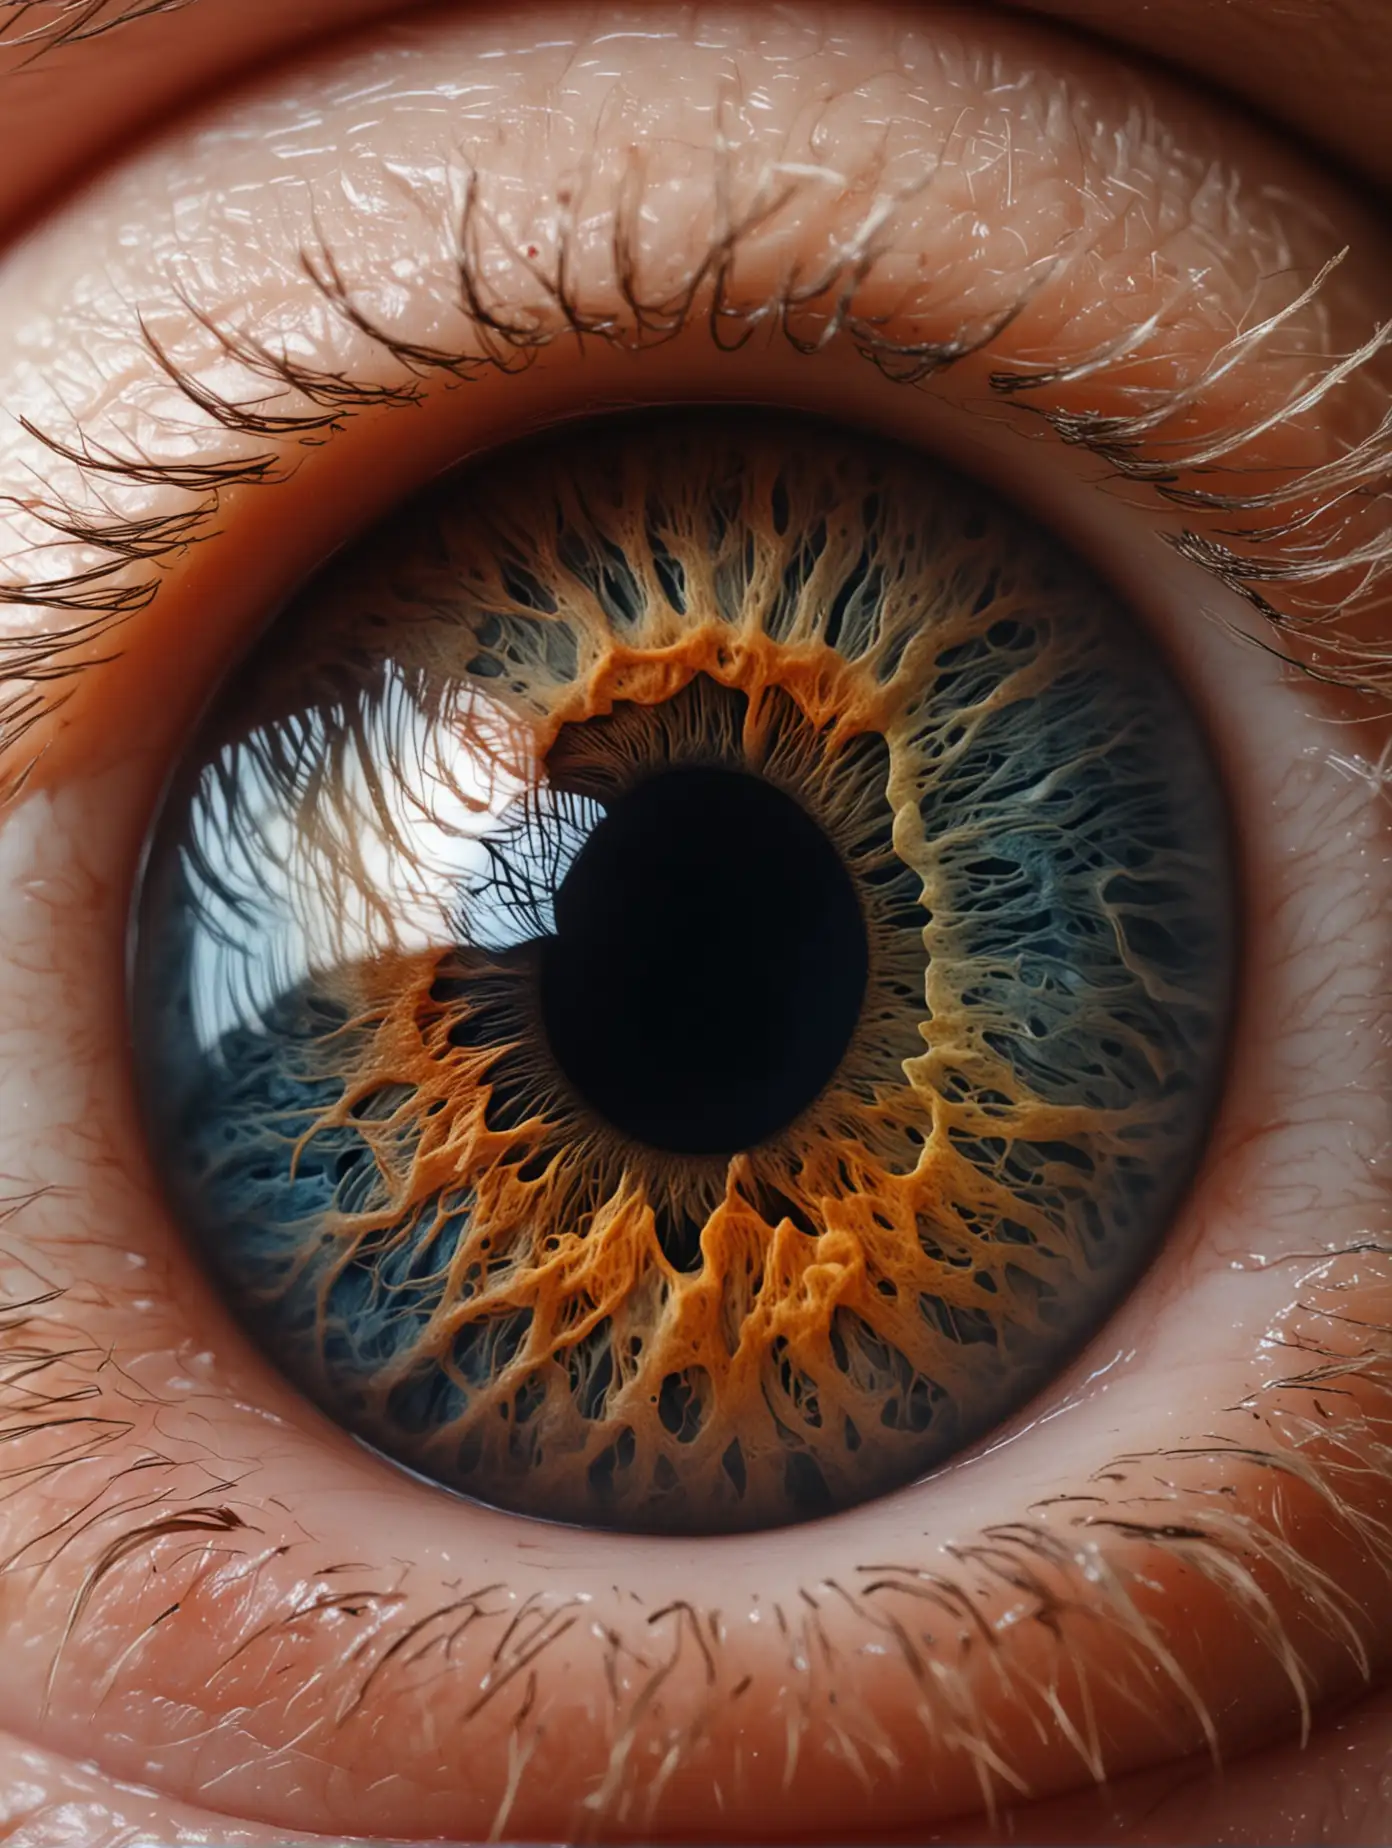 Up close picture of the human eyeball in color.